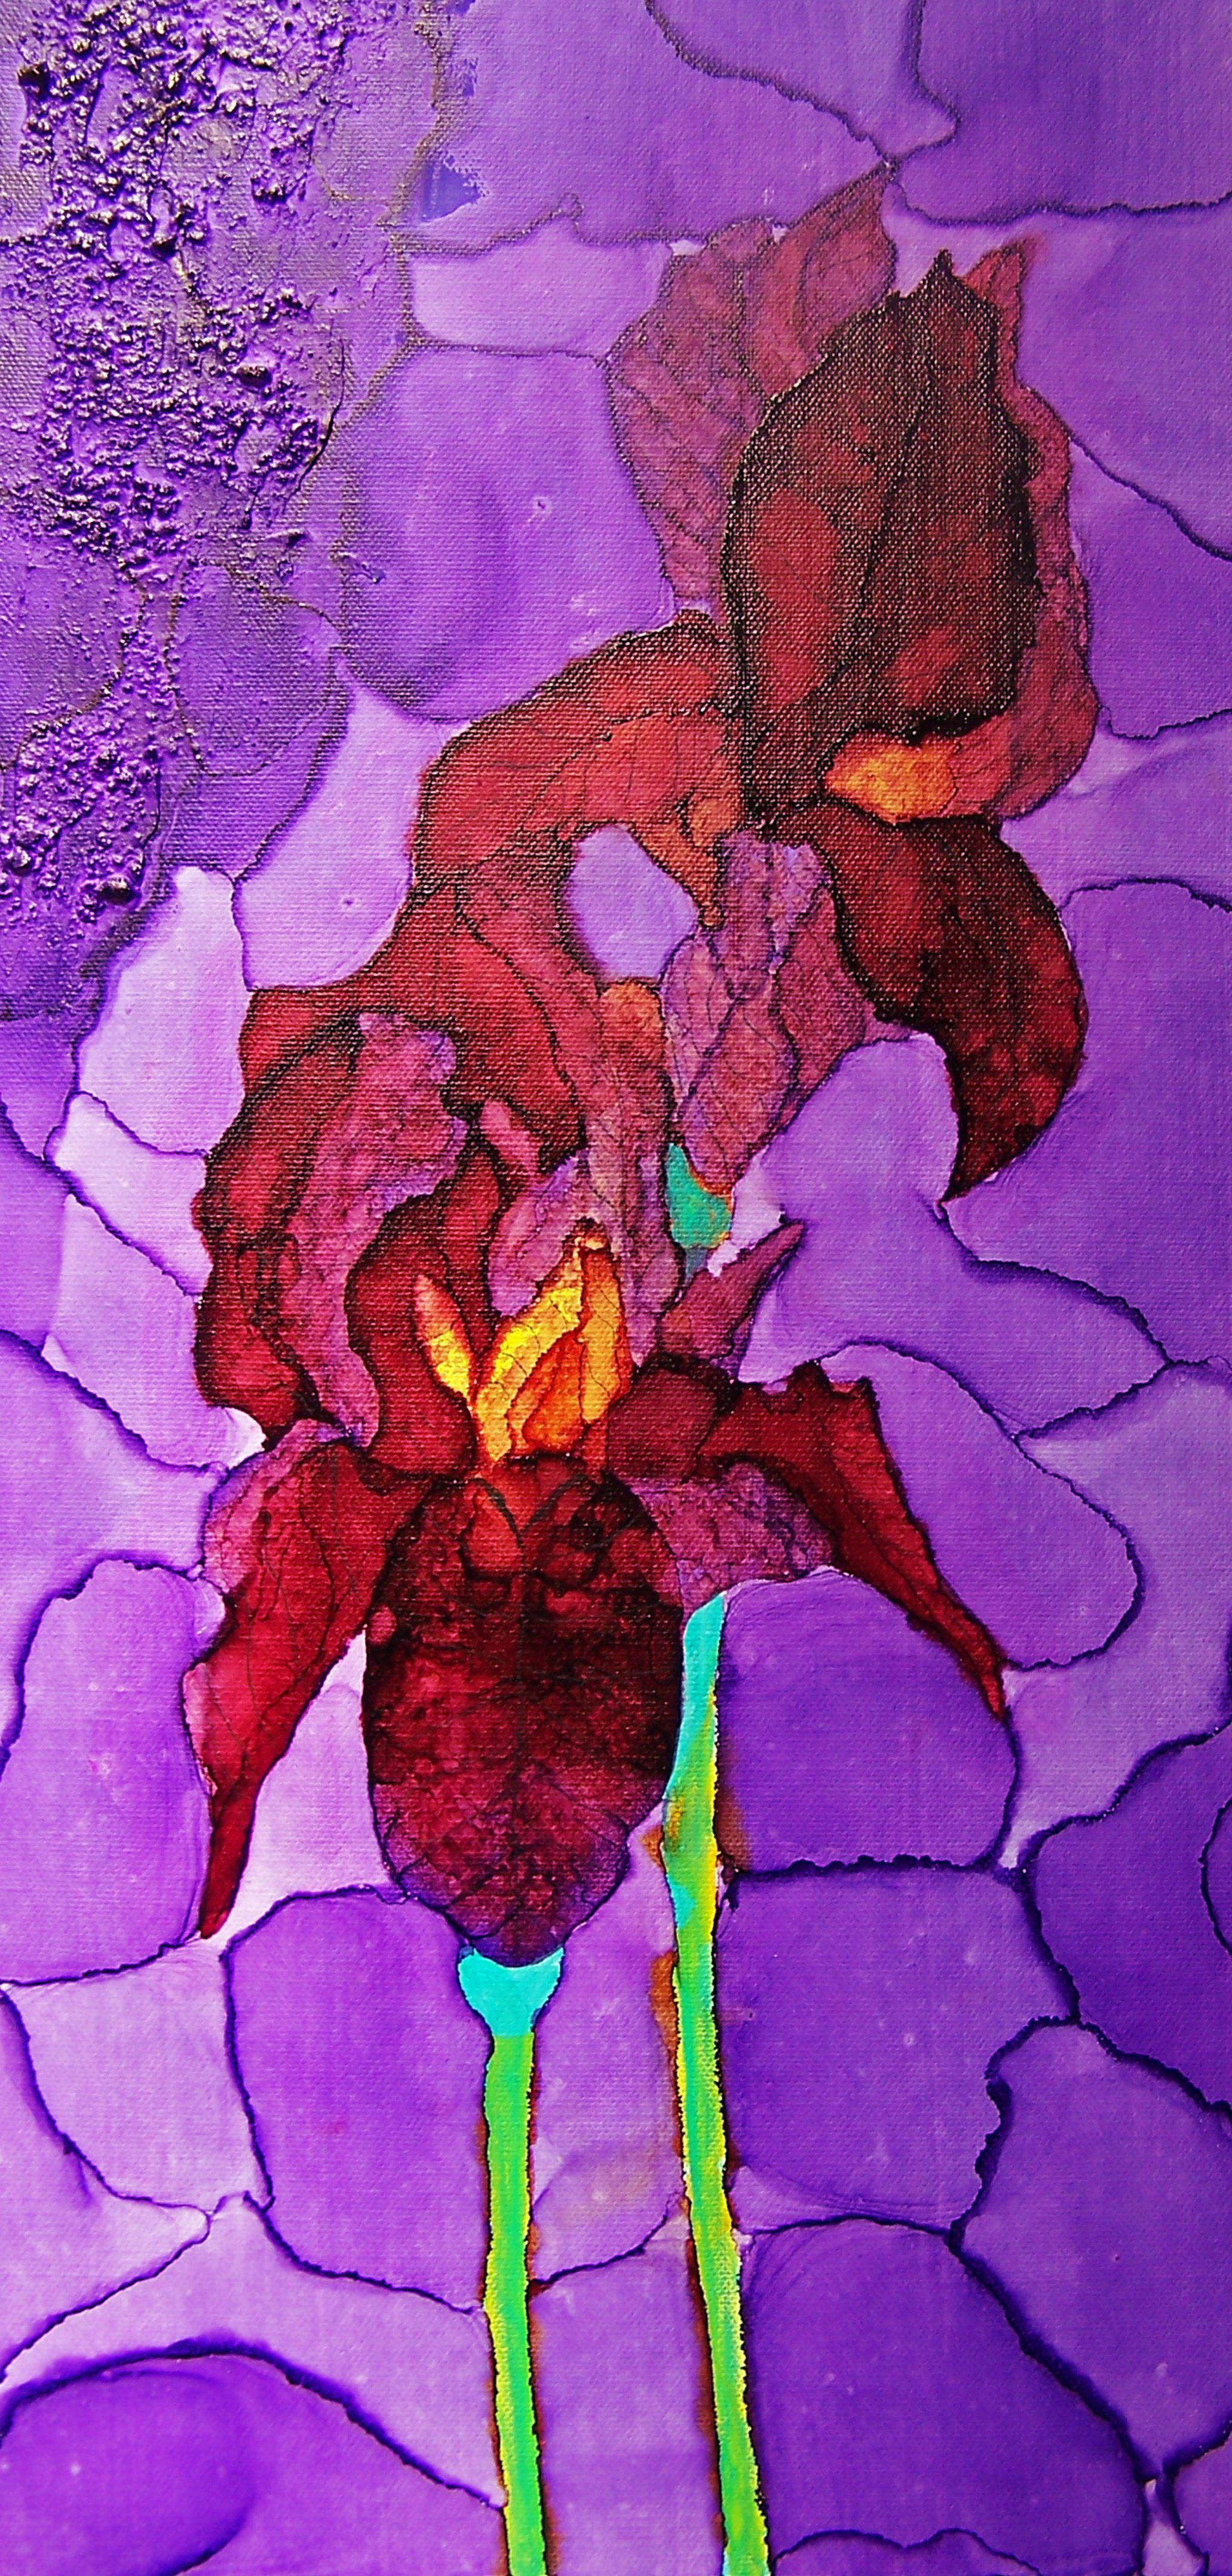 Abstract Painting Jo Moore - Peinture à l'huile sur toile Iris III pour O'Keefe